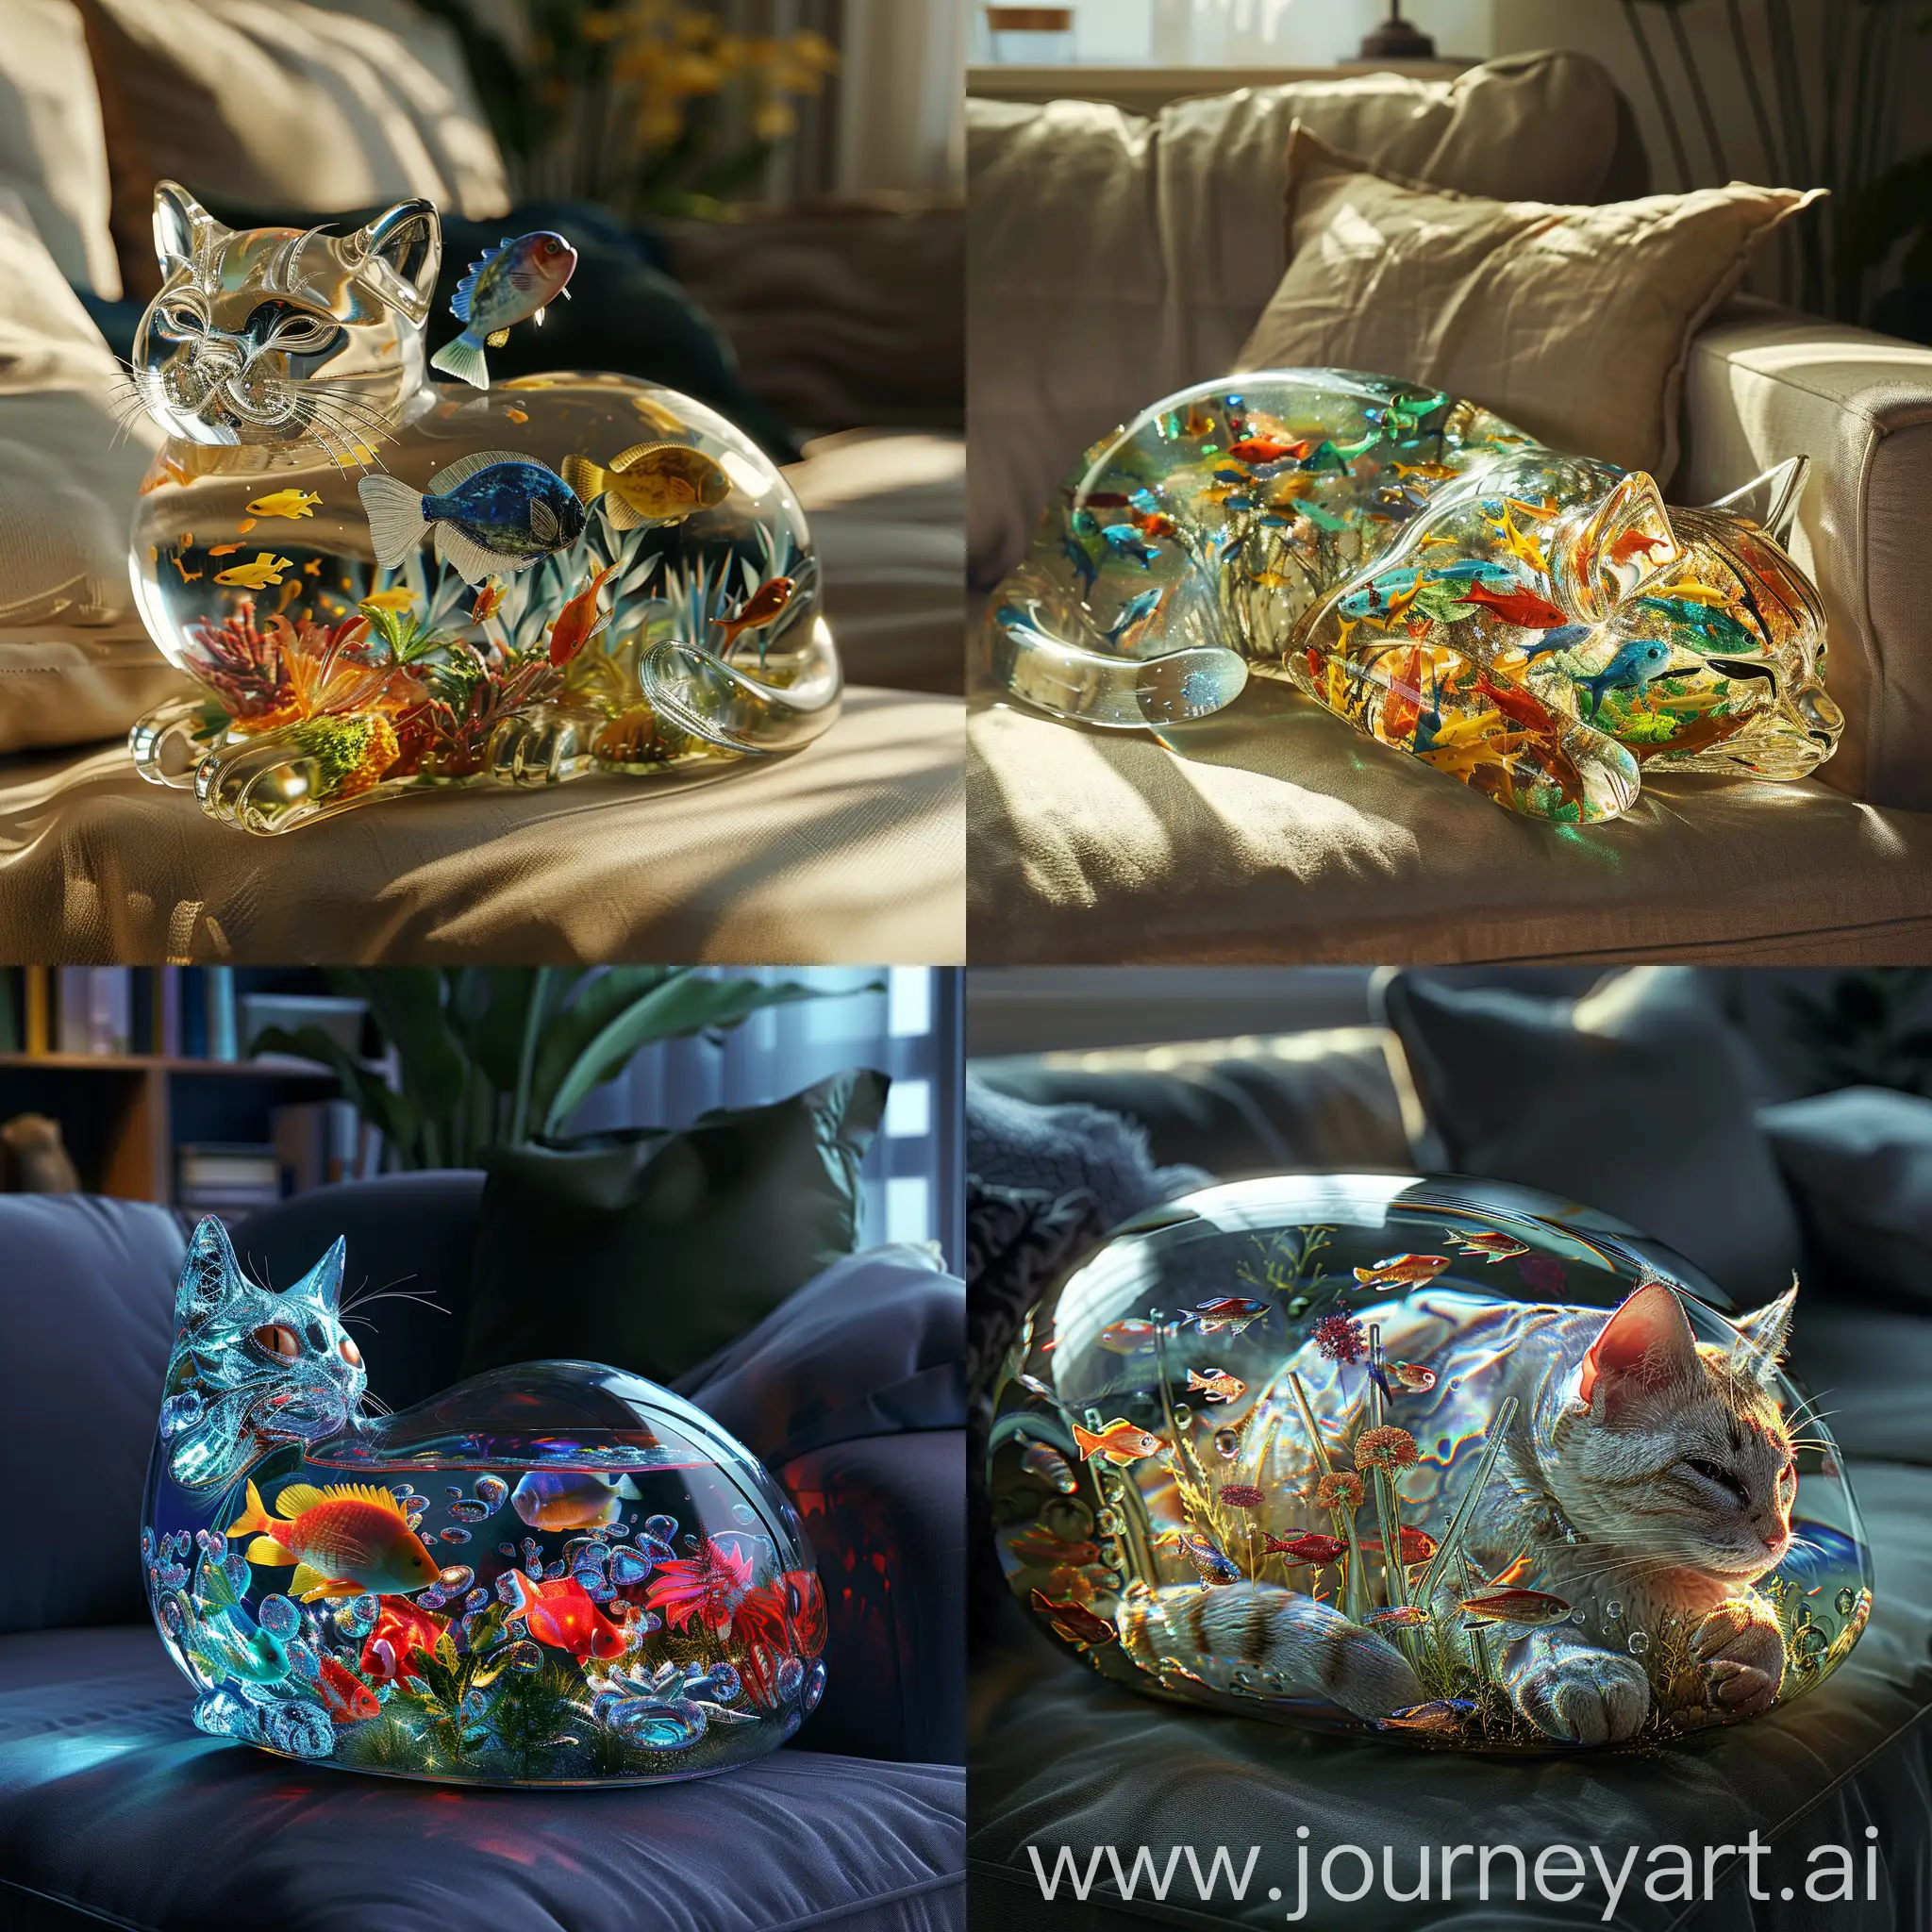 Create an image of a cat made entirely of glass, filled with water and colorful tropical fish, lying on the couch, glamour